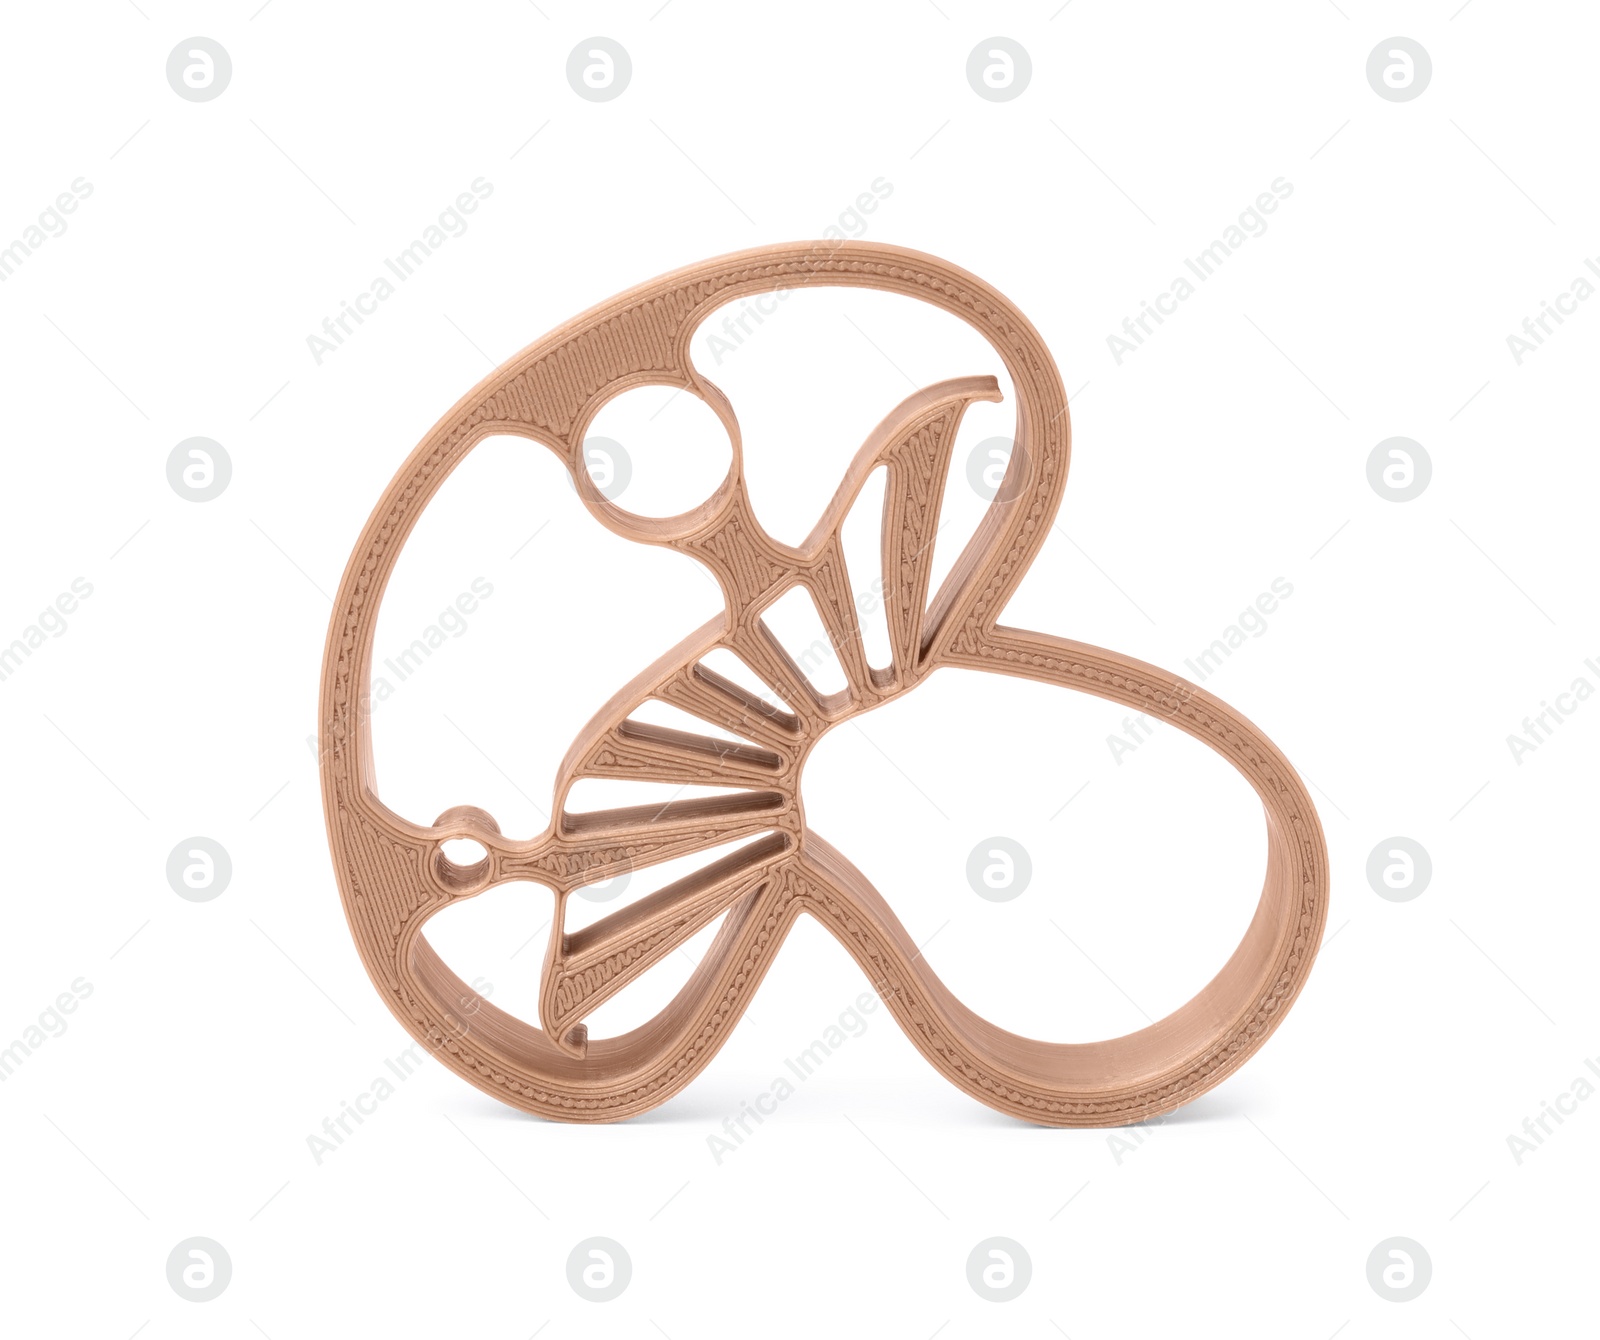 Photo of Cookie cutter in shape of mushroom isolated on white